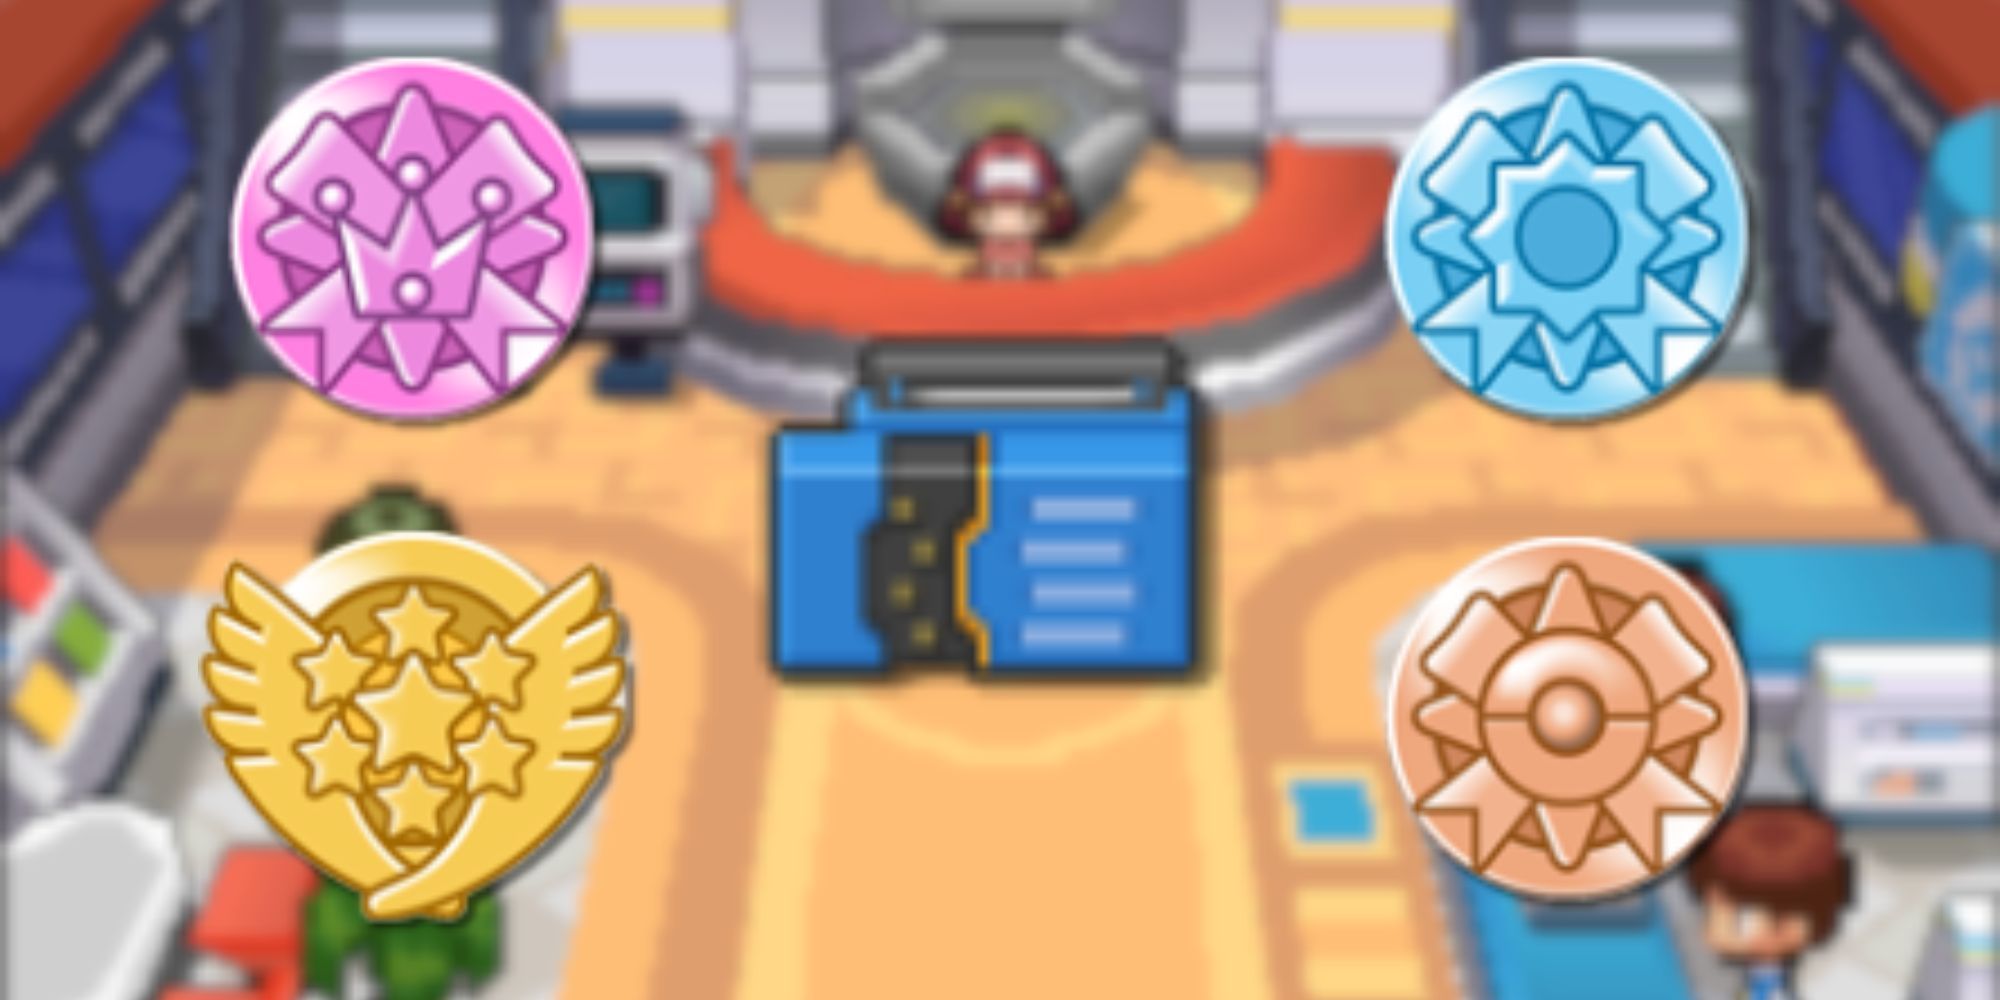 4 types of medals and the medal box.